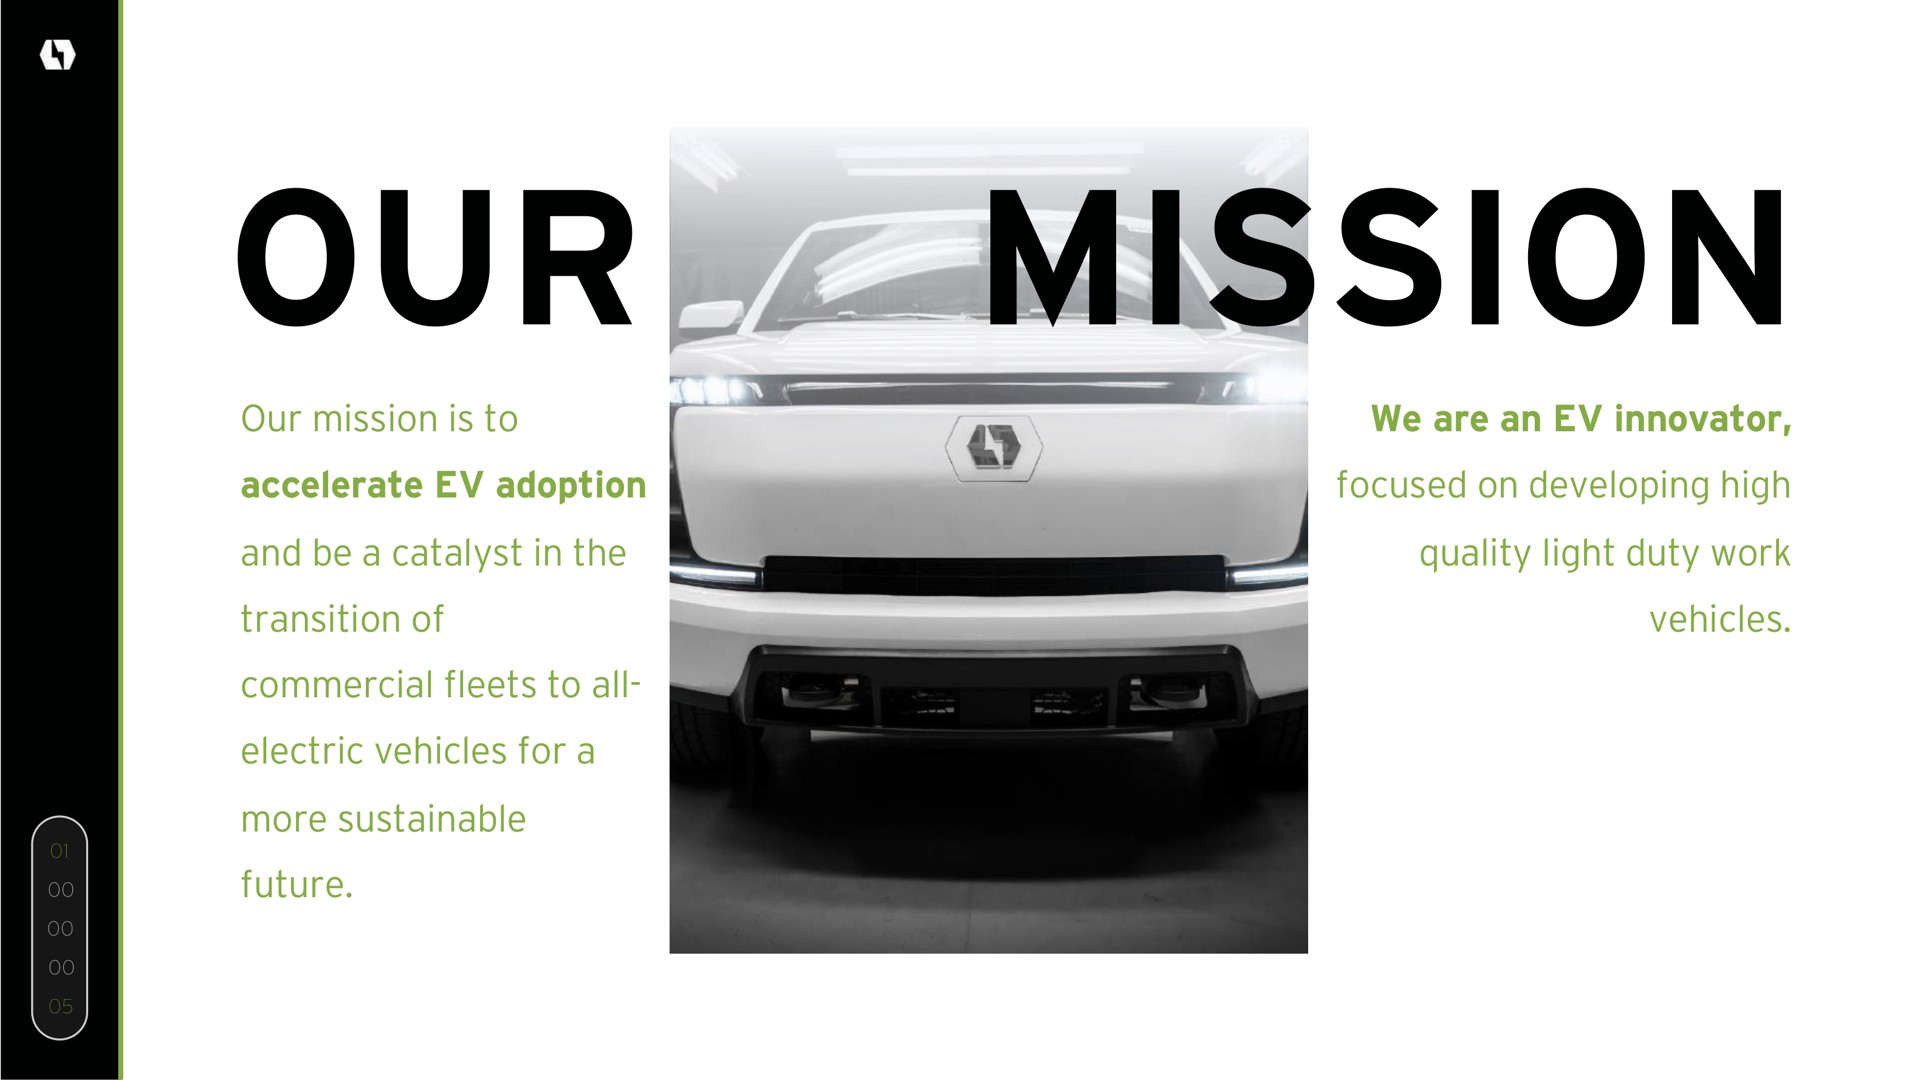 mission we are an innovator focused on developing high quality light duty work vehicles our our mission is to accelerate adoption and be a catalyst in the transition of commercial fleets to all electric vehicles for a more sustainable future | Lordstown Motors